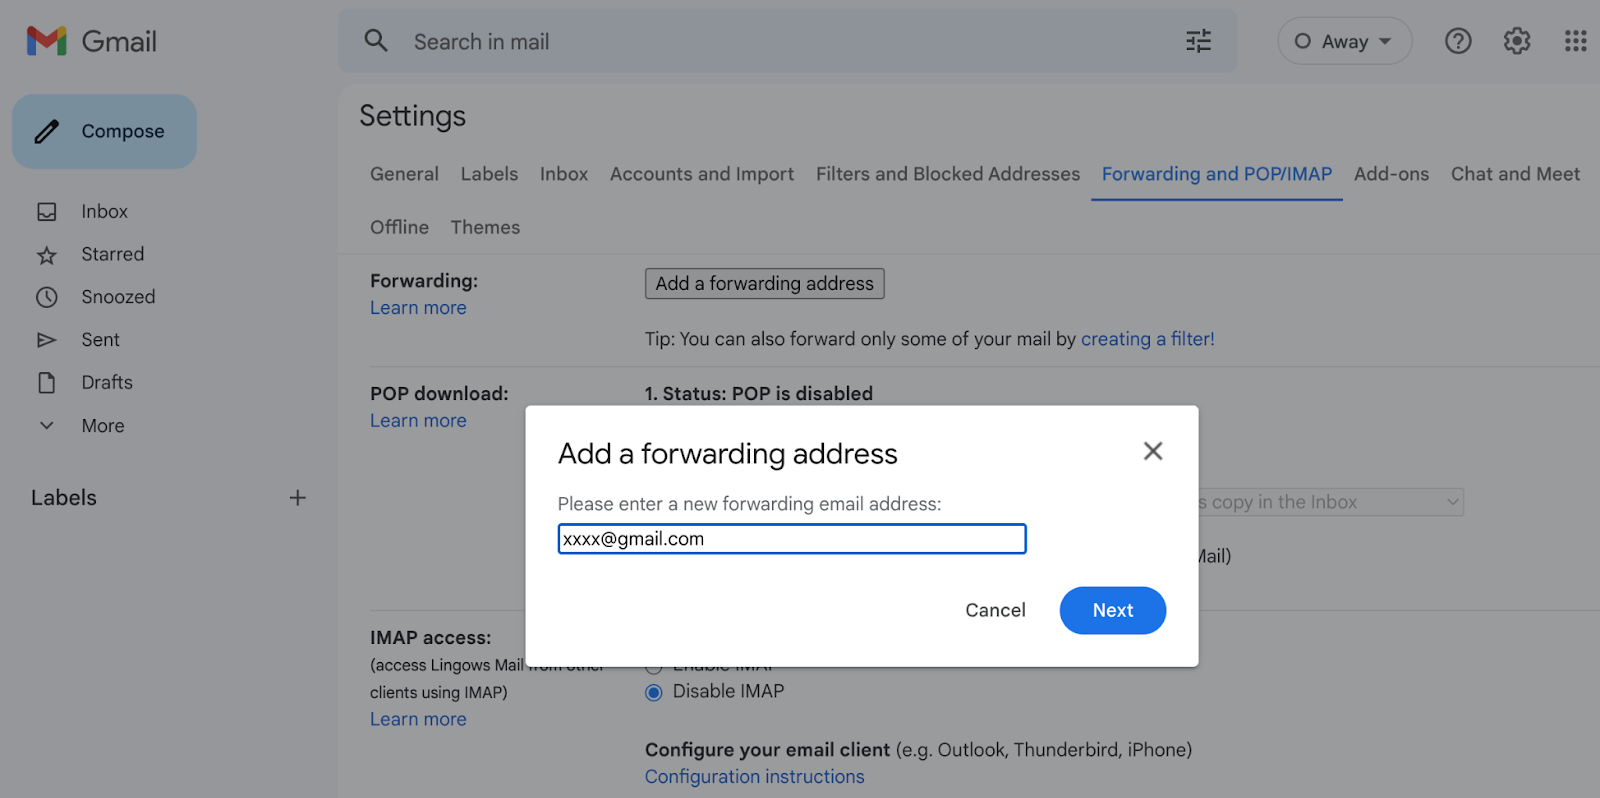 Type the Gmail address where you want forwarded emails to go.